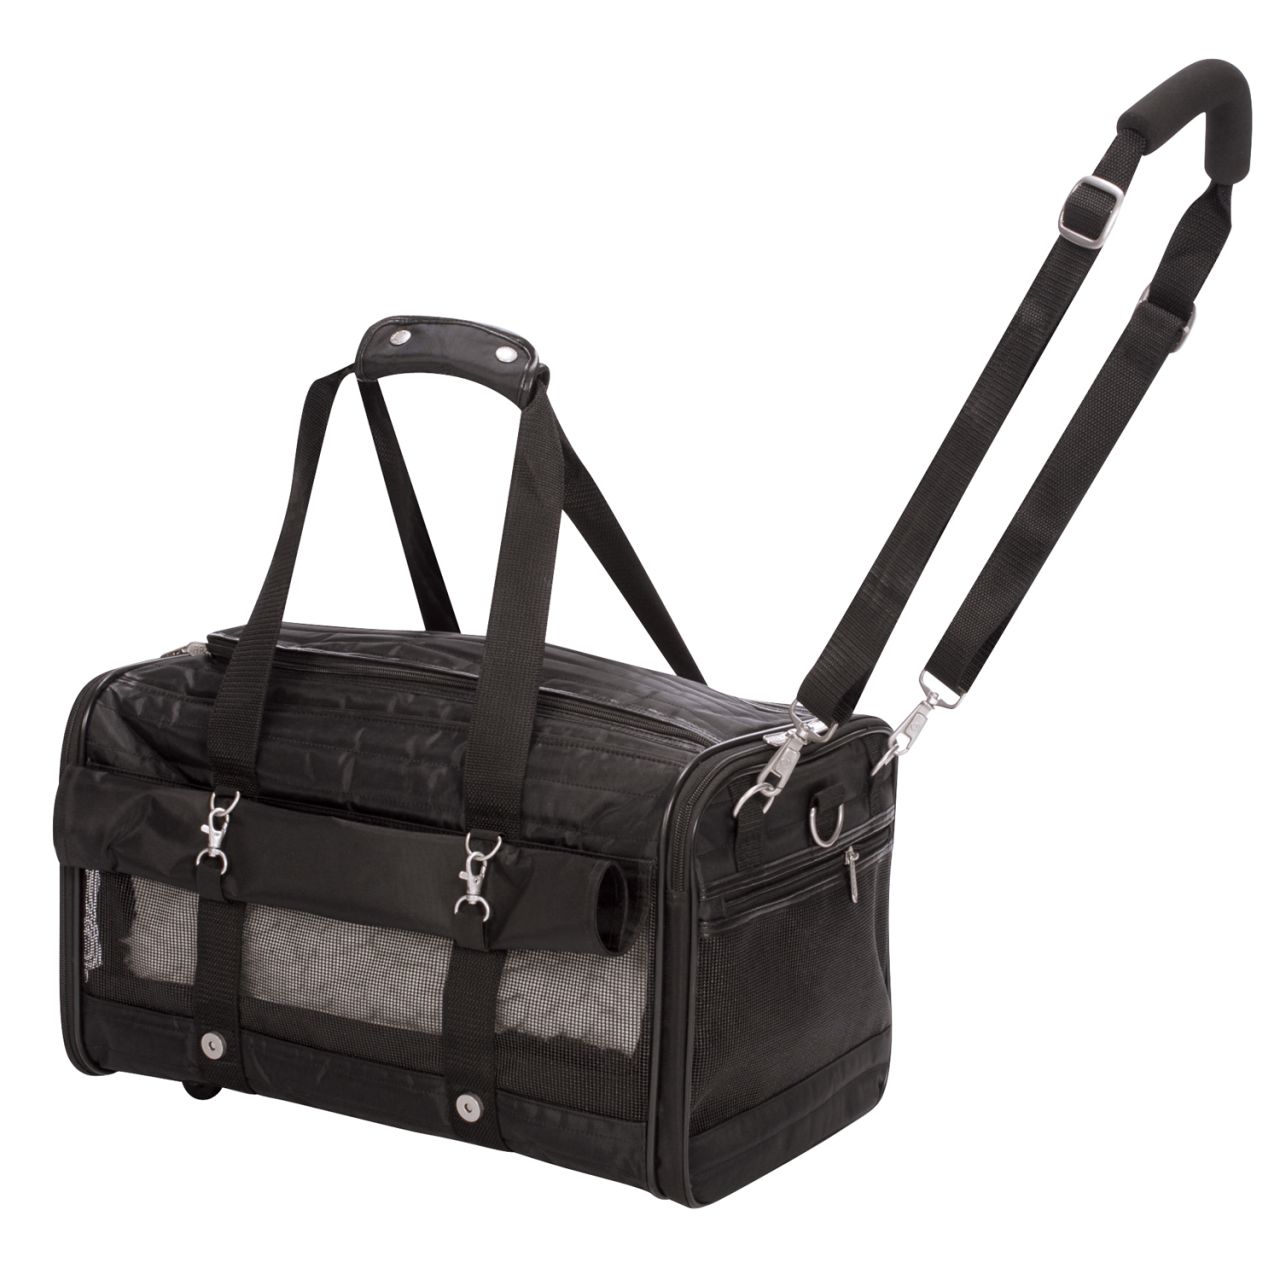 The Ultimate Bag on Wheels pet carrier fits animals up to 16 pounds. 